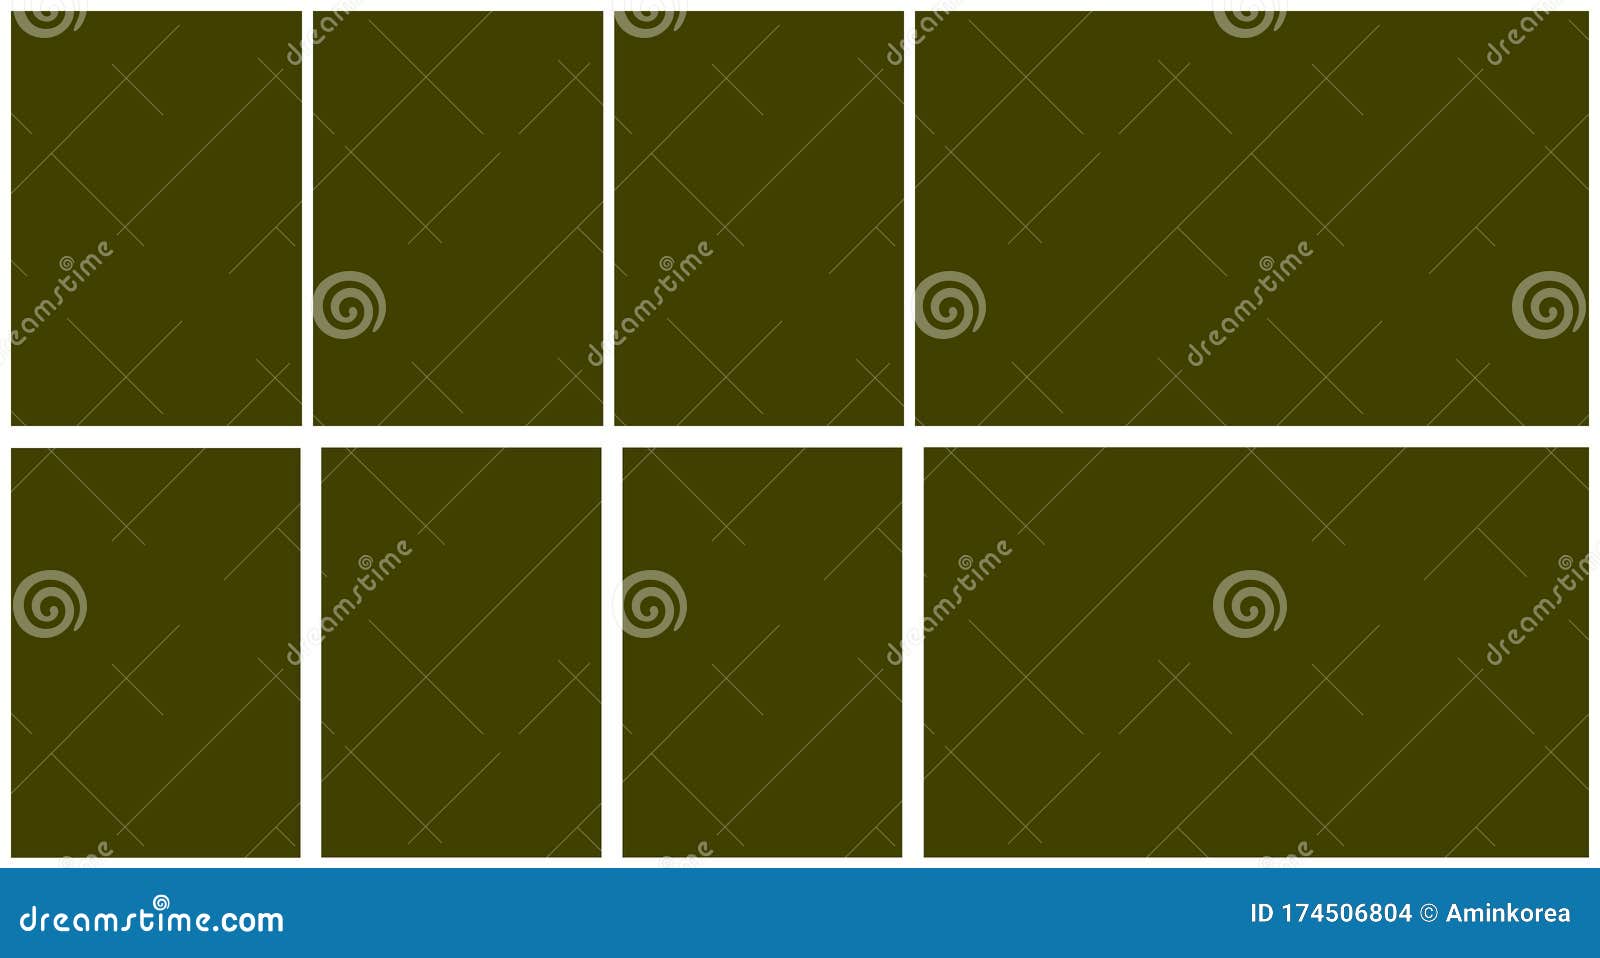 7 picture collage template